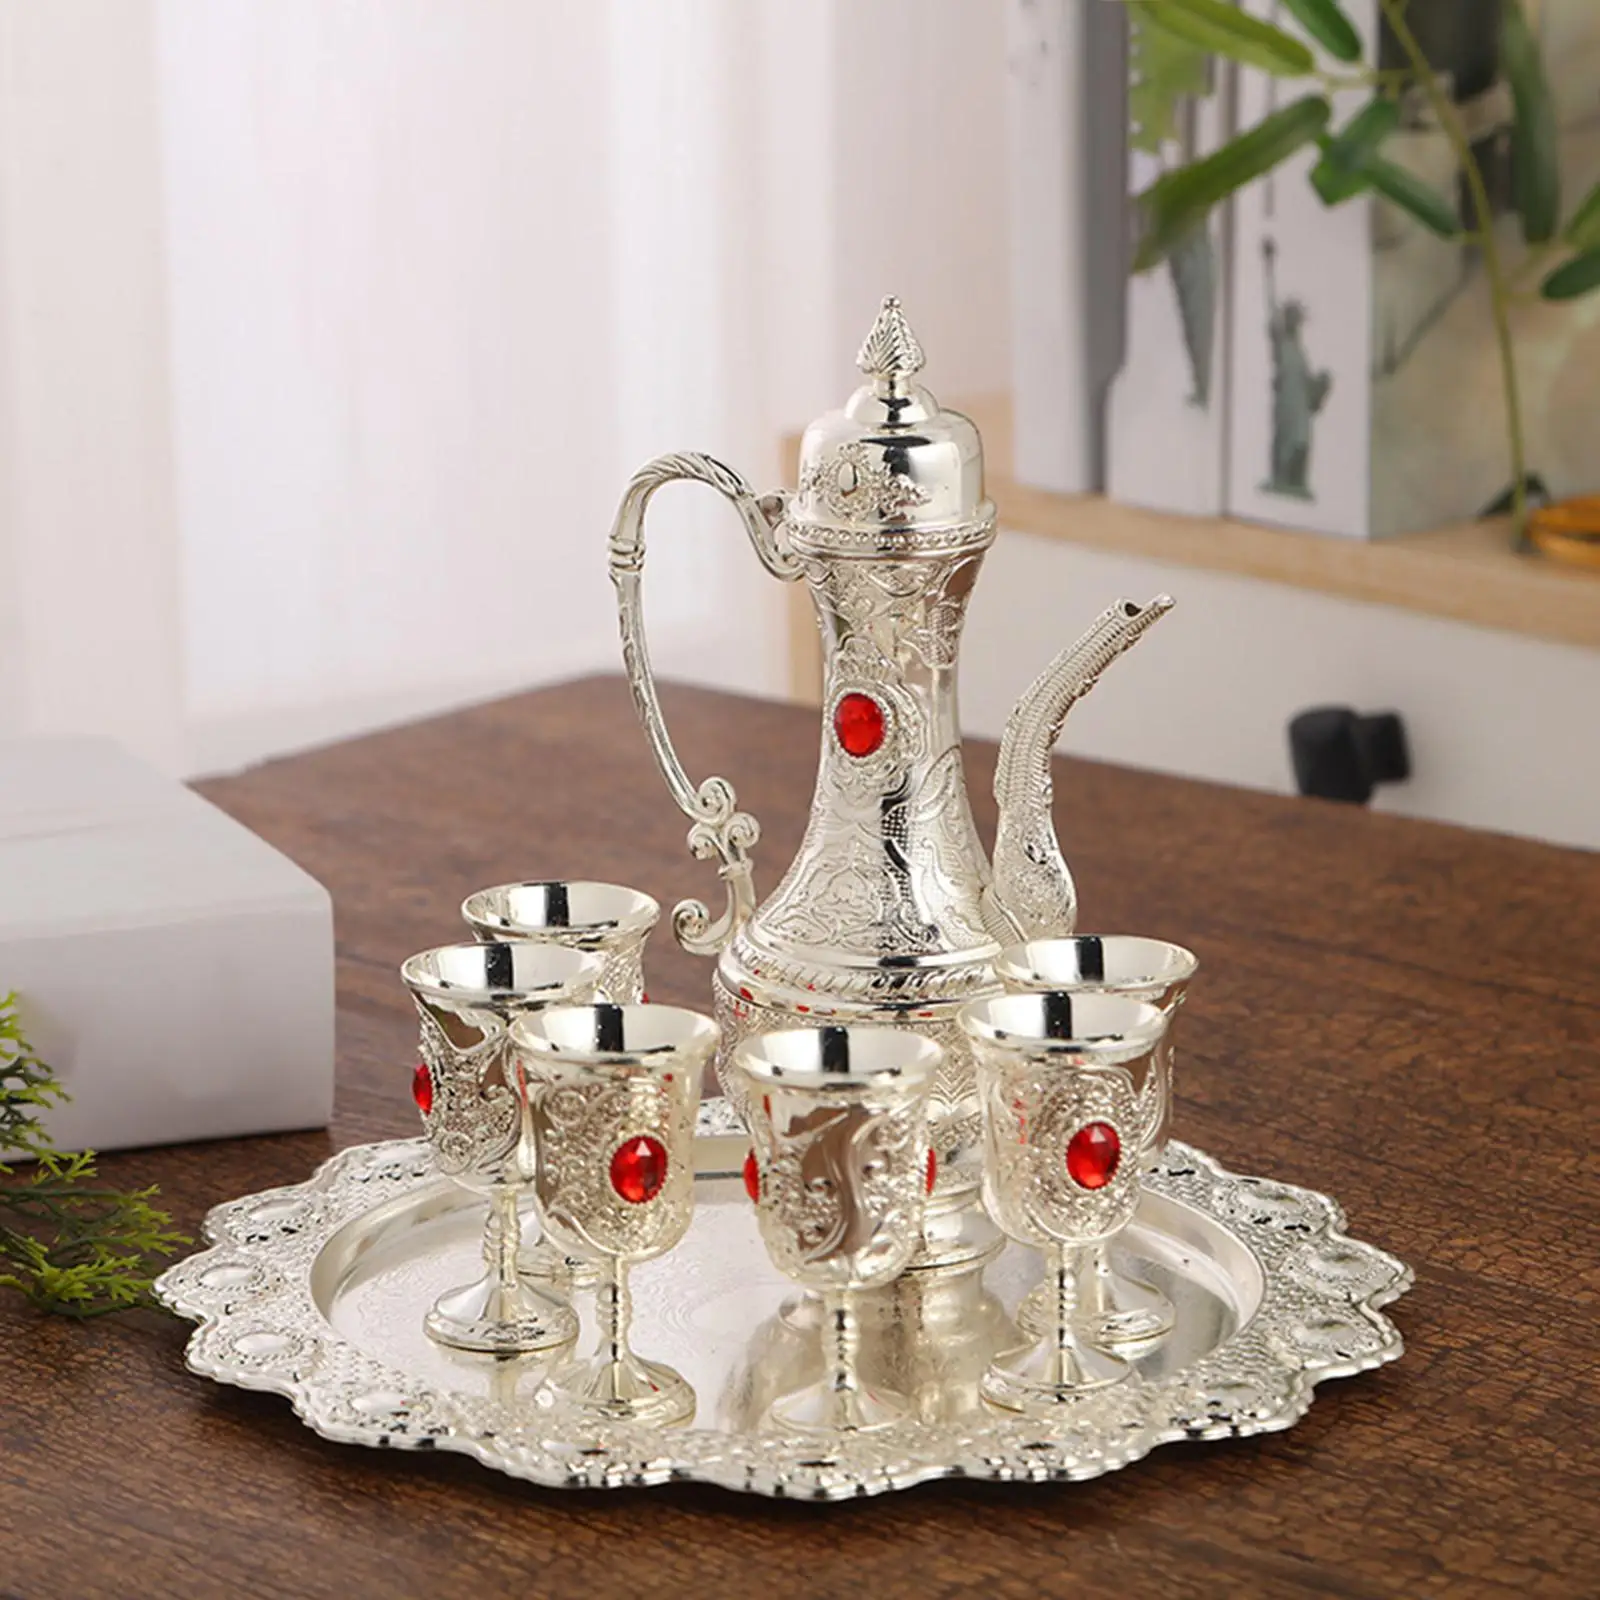 6x Europe Russian Style Wine Drinking Cups Hip Flask Set with Tray Drinking Cups Wine Glass Jug Set for Holiday Table Decoration